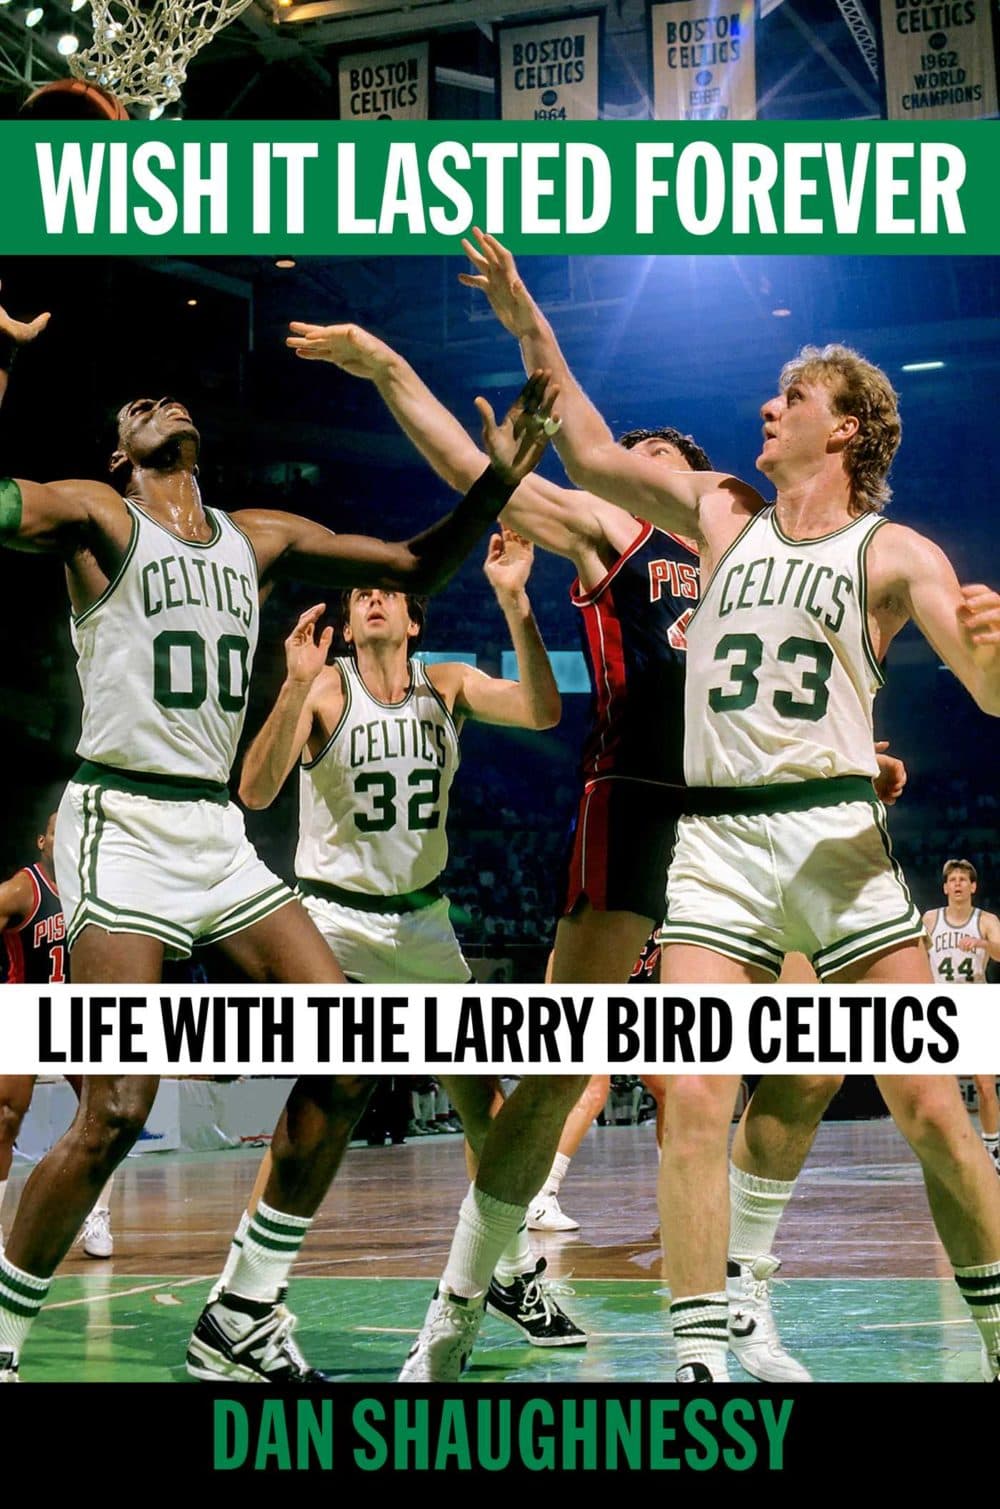 Cover of Dan Shaughnessy's book, &quot;Wish It Lasted Forever: Life With The Larry Bird Celtics.&quot; (Courtesy)